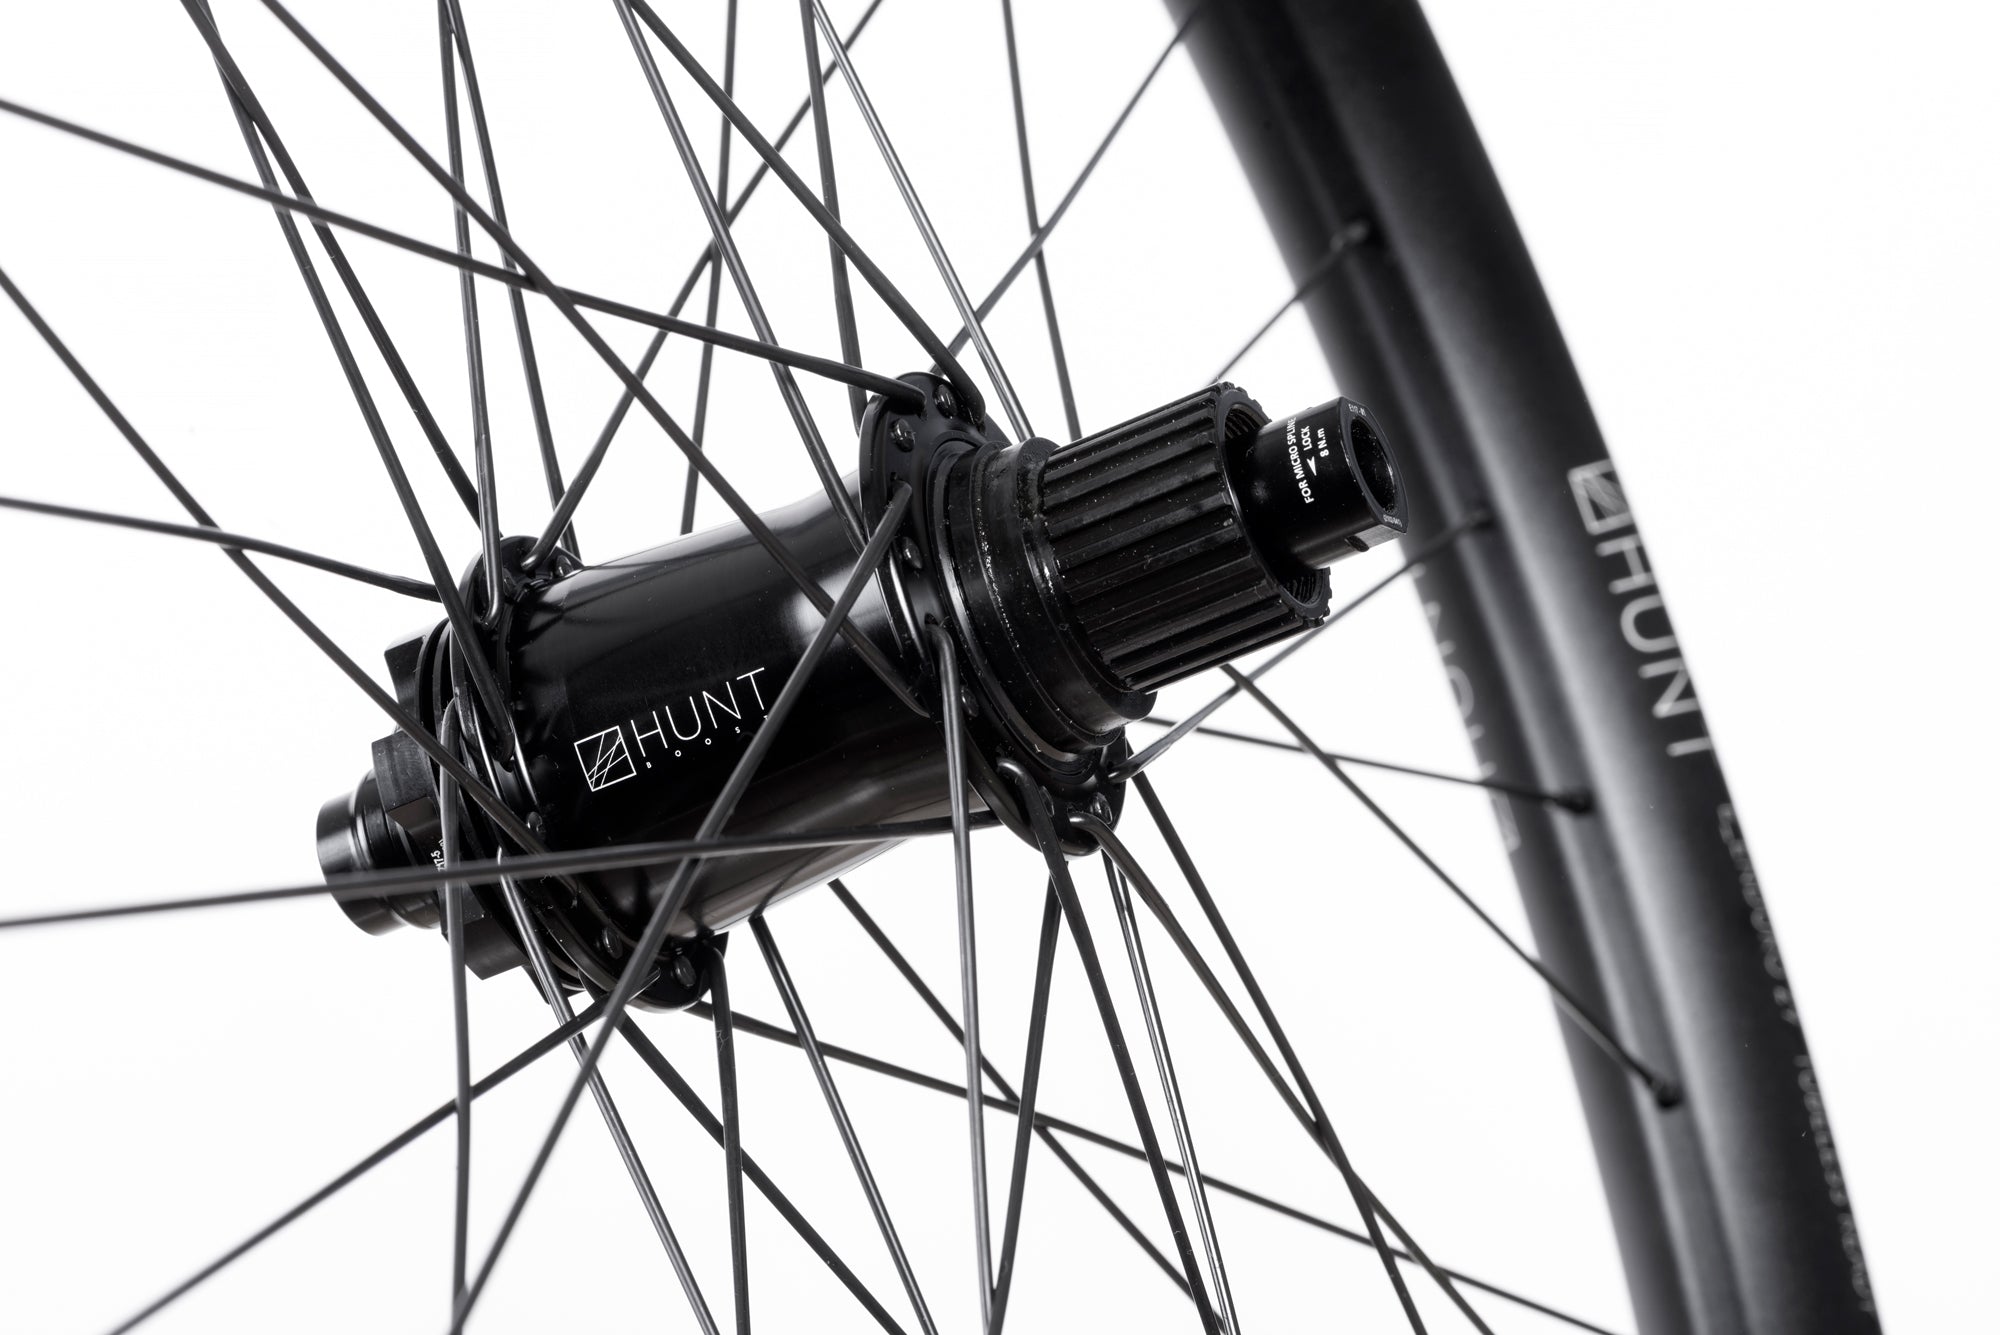 <html><h1>Rear Hub</h1><i>The demands of modern day Enduro riding are tougher than ever before. The E_EnduroWide hubs have been developed specifically for these demands; 10 degrees of engagement is delivered by a 6x1 pawl set up for increased resistance from the extra torque. Heatsinks built into the 6-bolt rotor mount helps to dissapate heat away from the hub and brake system. Oversized 17mm 7075-T6 series alloy increase stiffness.</i></html>